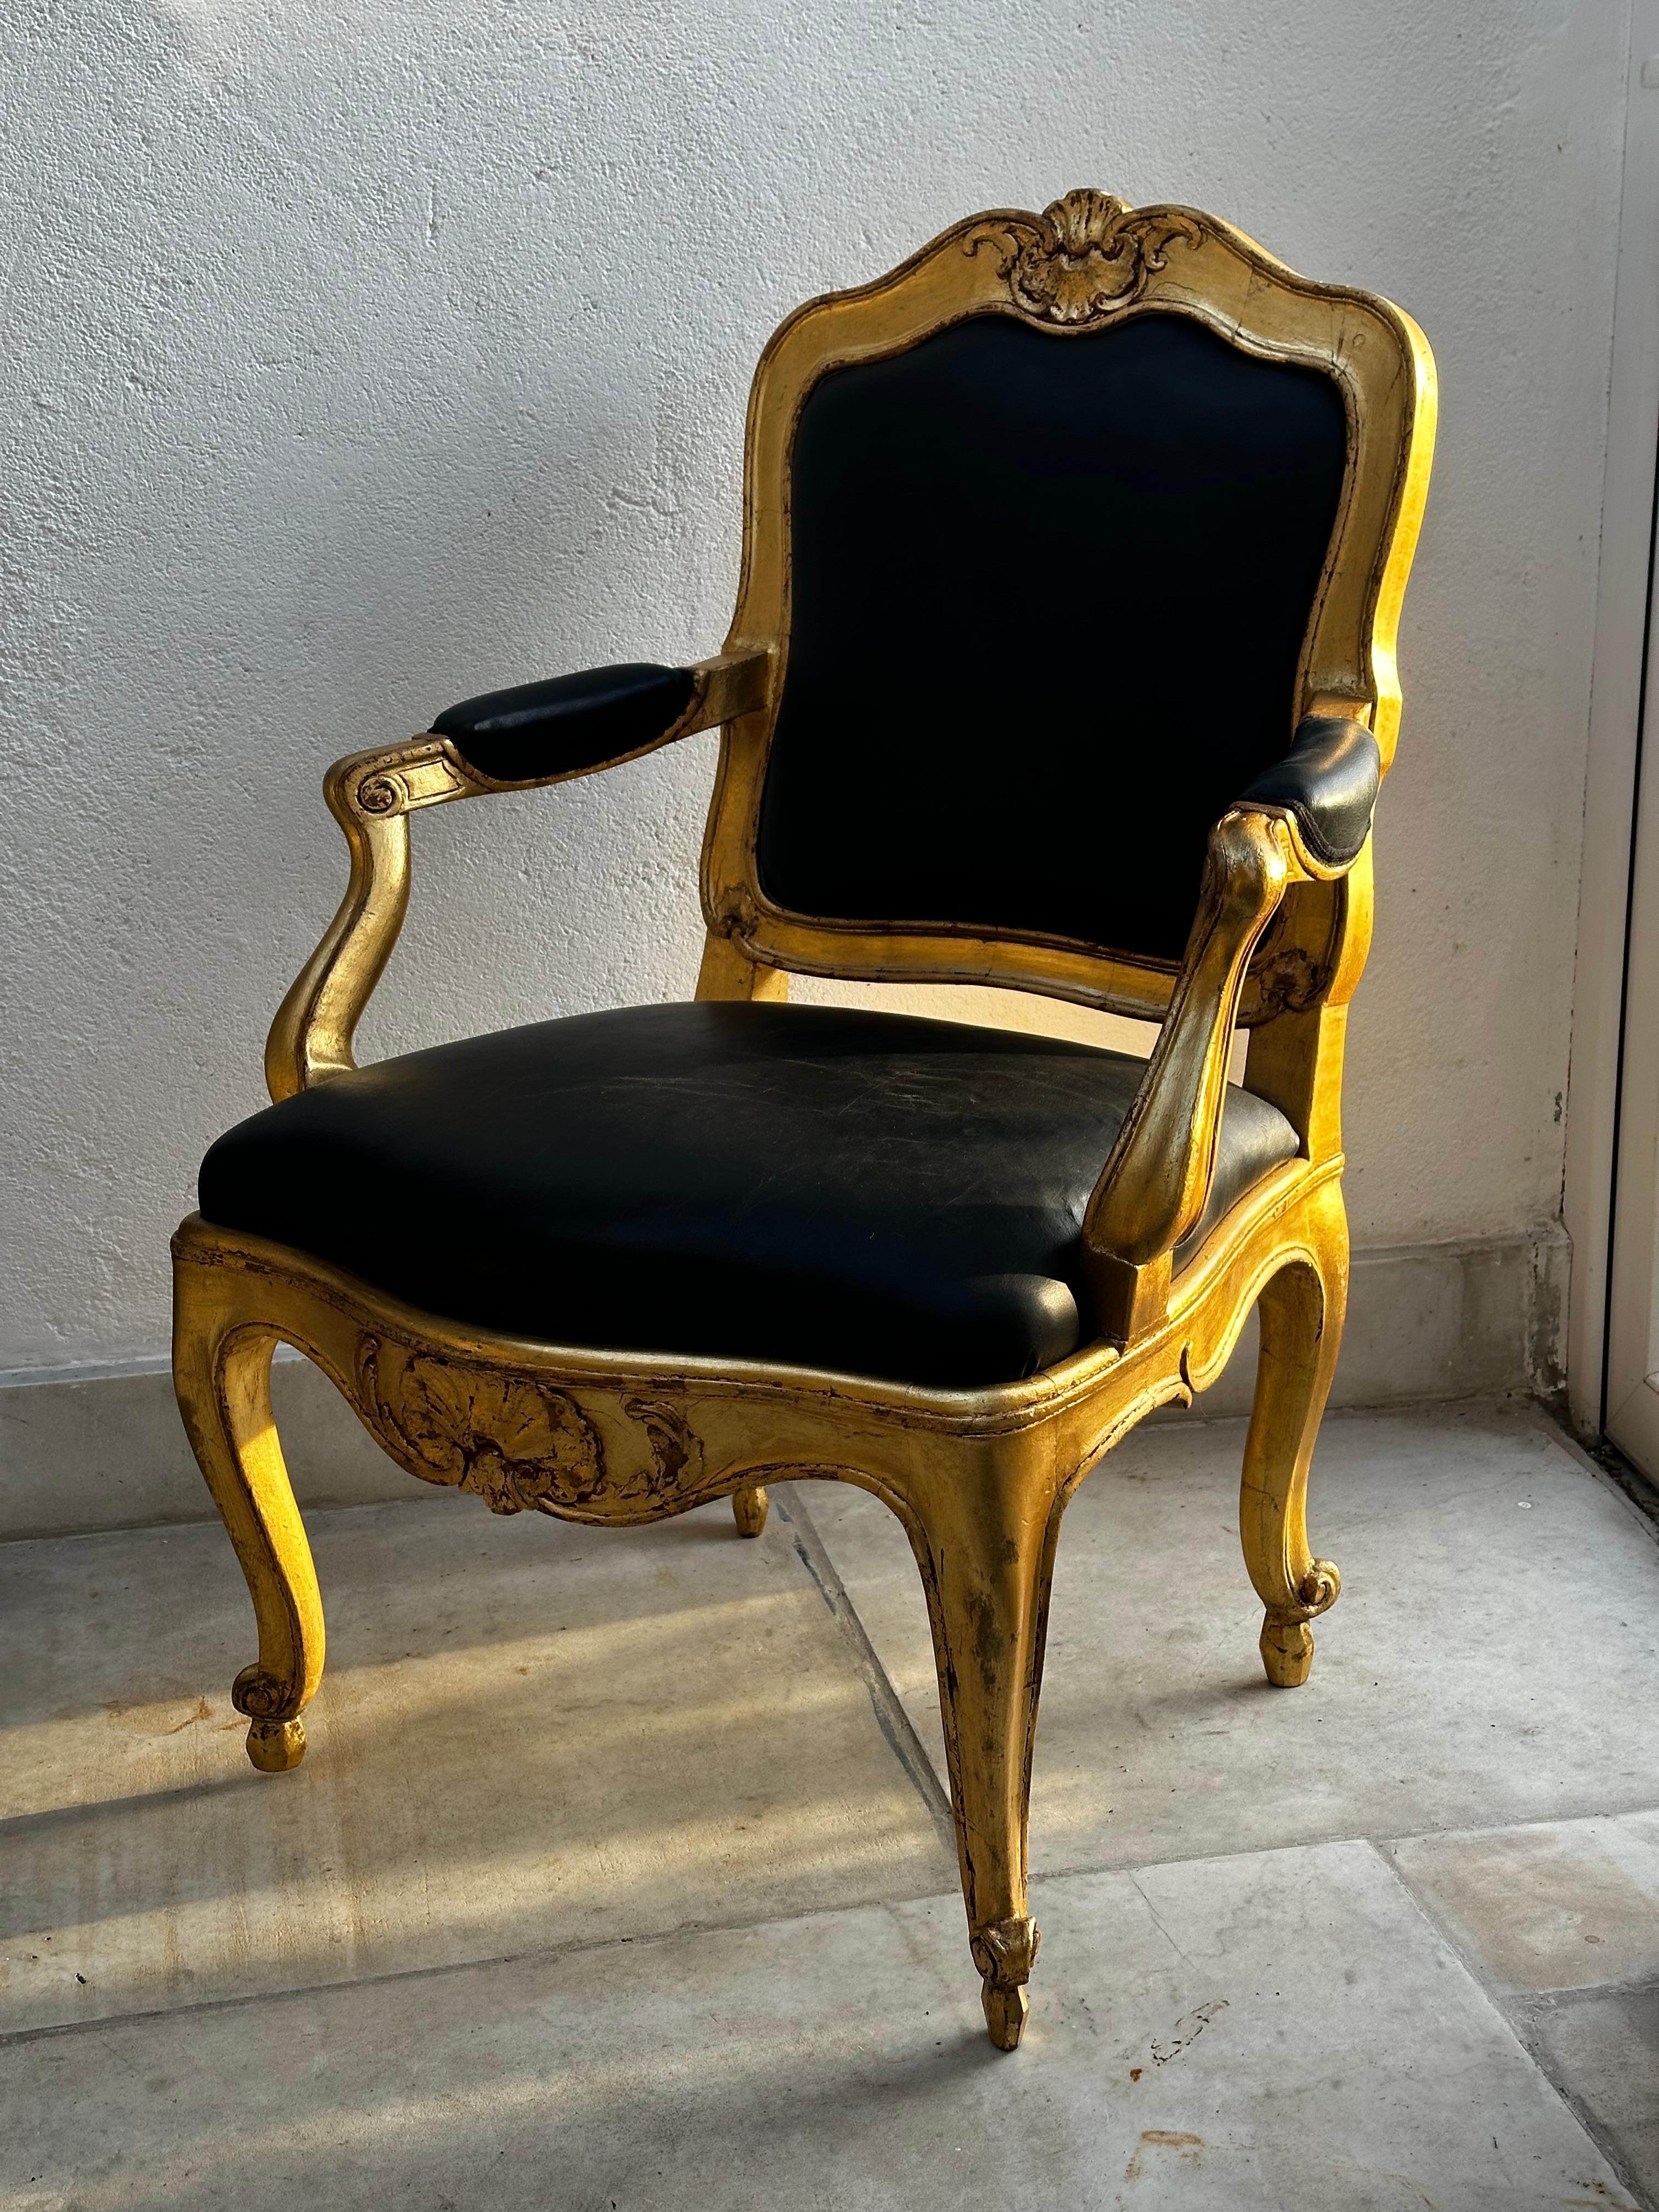 A pair of high class  rococo armchairs made in Stockholm. This type of armchairs with loose back plate were made in the Castle workshop. Front legs are decorated with acanthus leafs and the front top and bottom with rocailles.

The word Rococo is